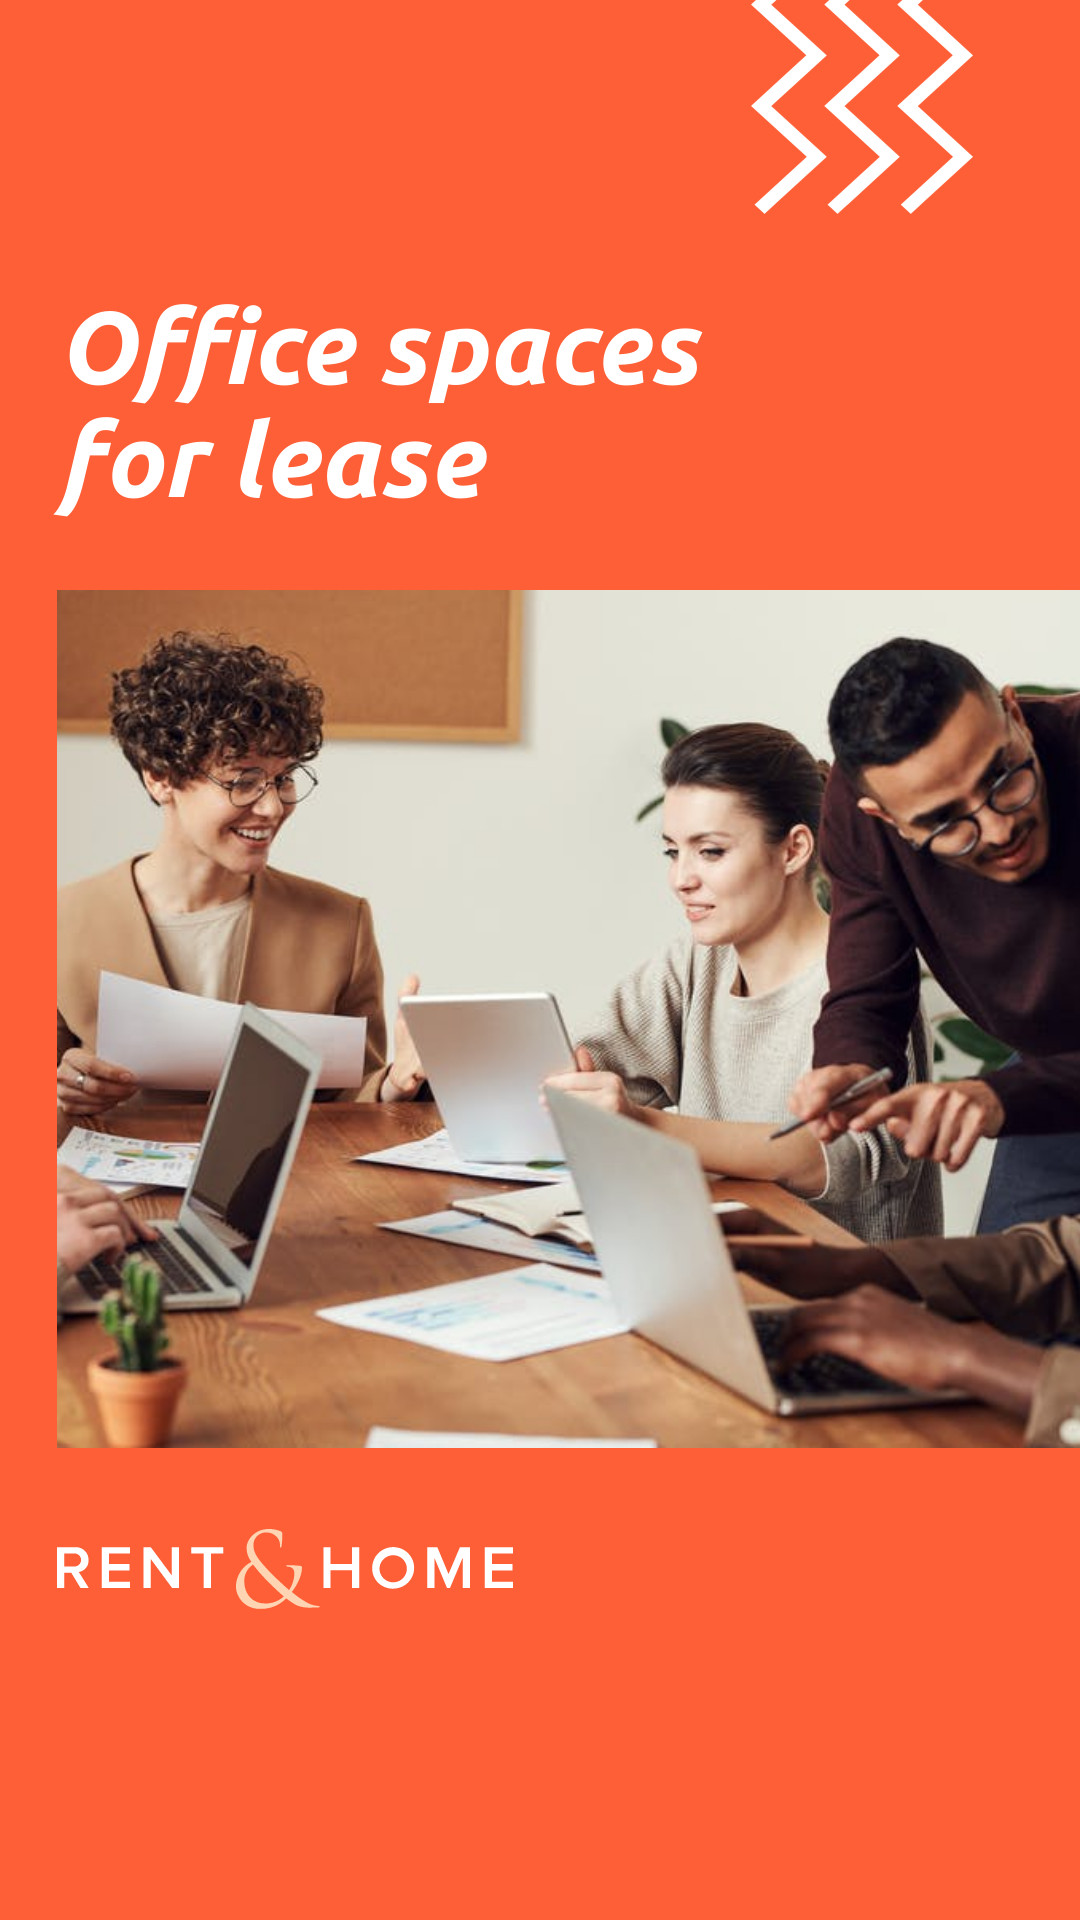 Orange Office Spaces for Lease Inline Rectangle 300x250